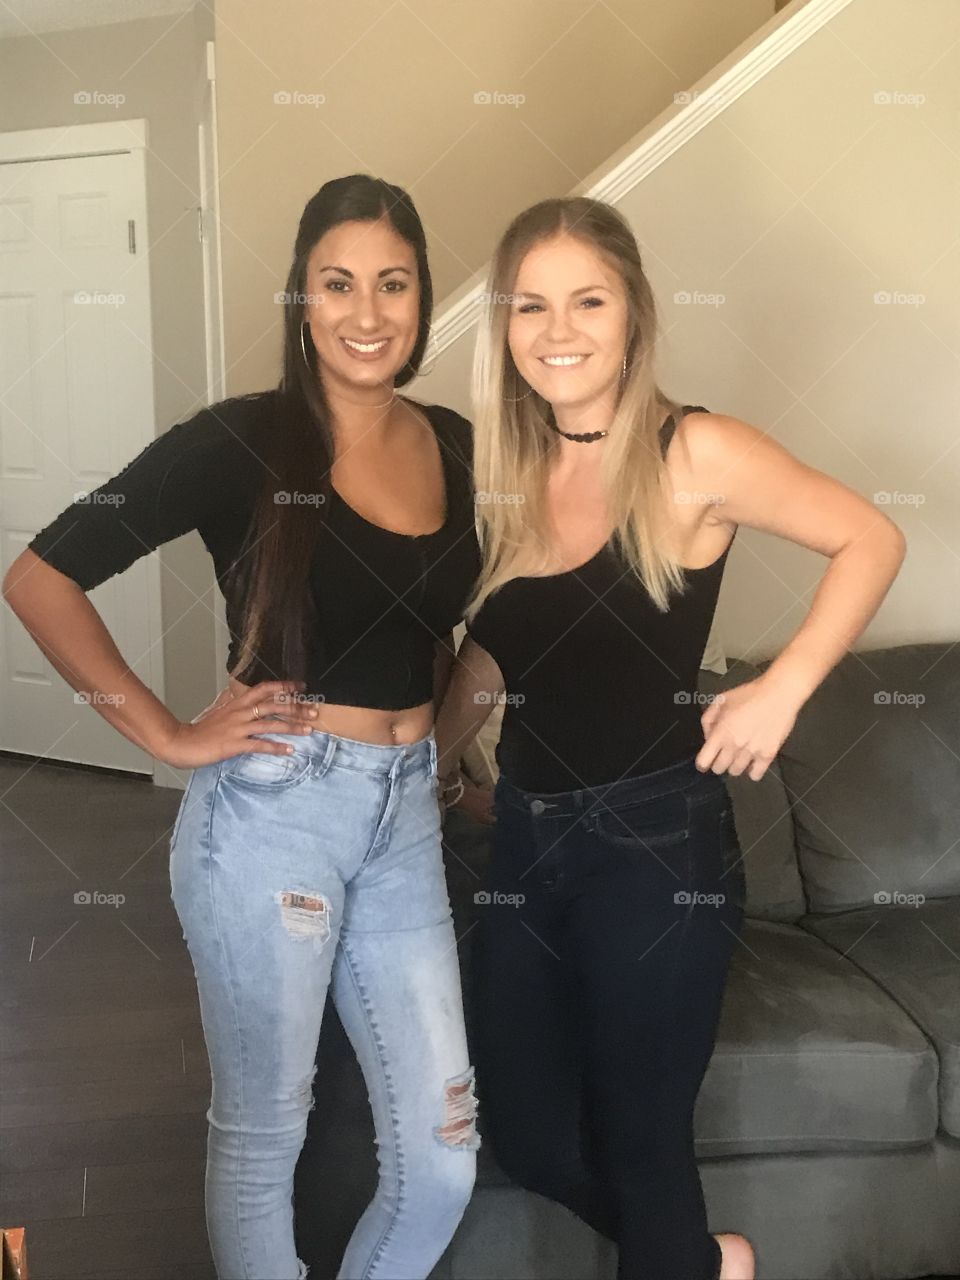 Two girls getting ready for a night out!